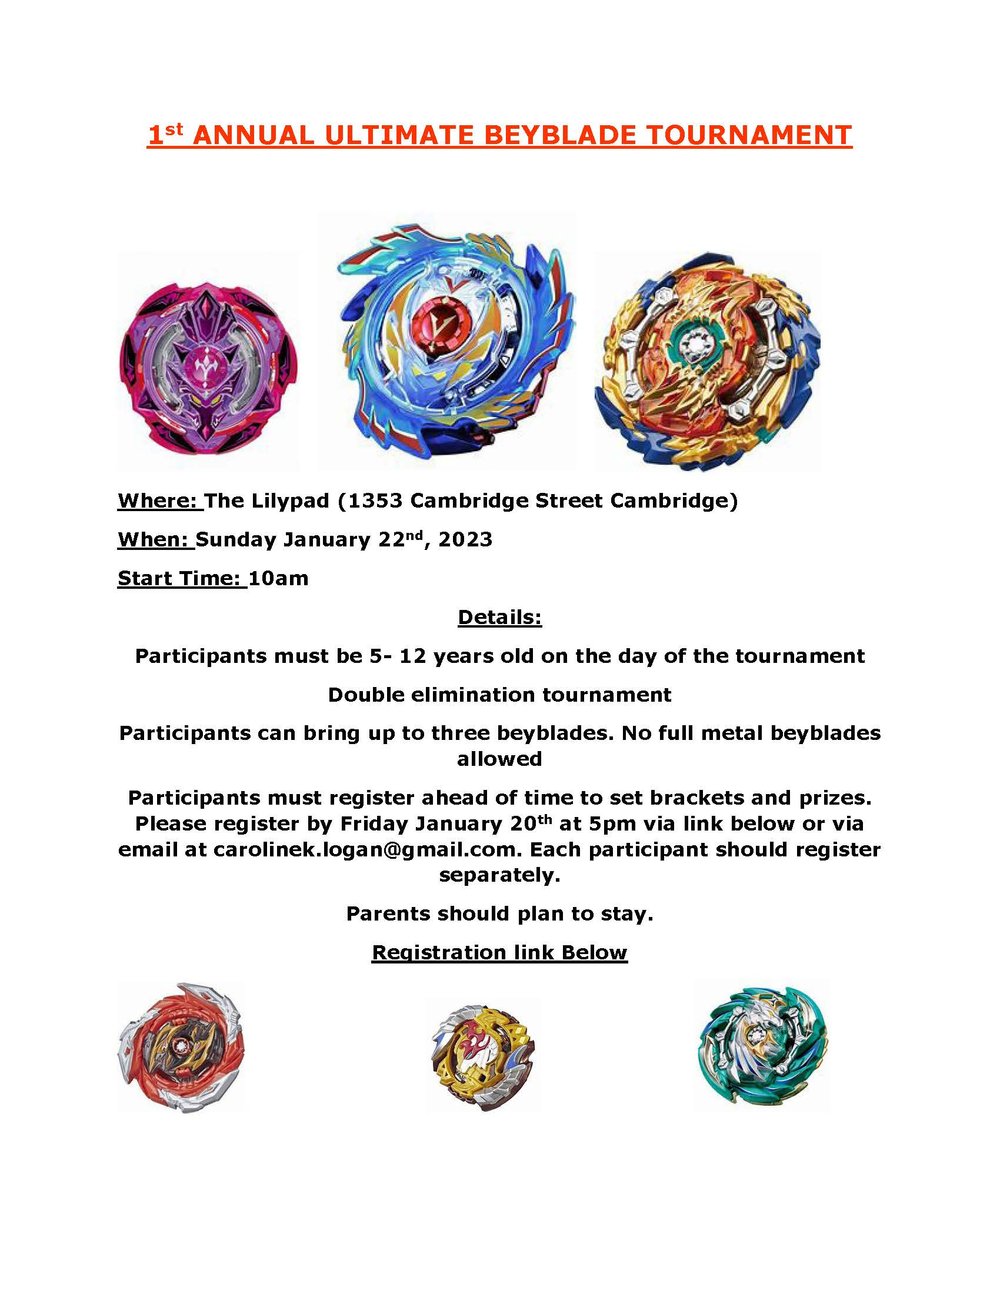 1st Annual Ultimate Beyblade Tournament The